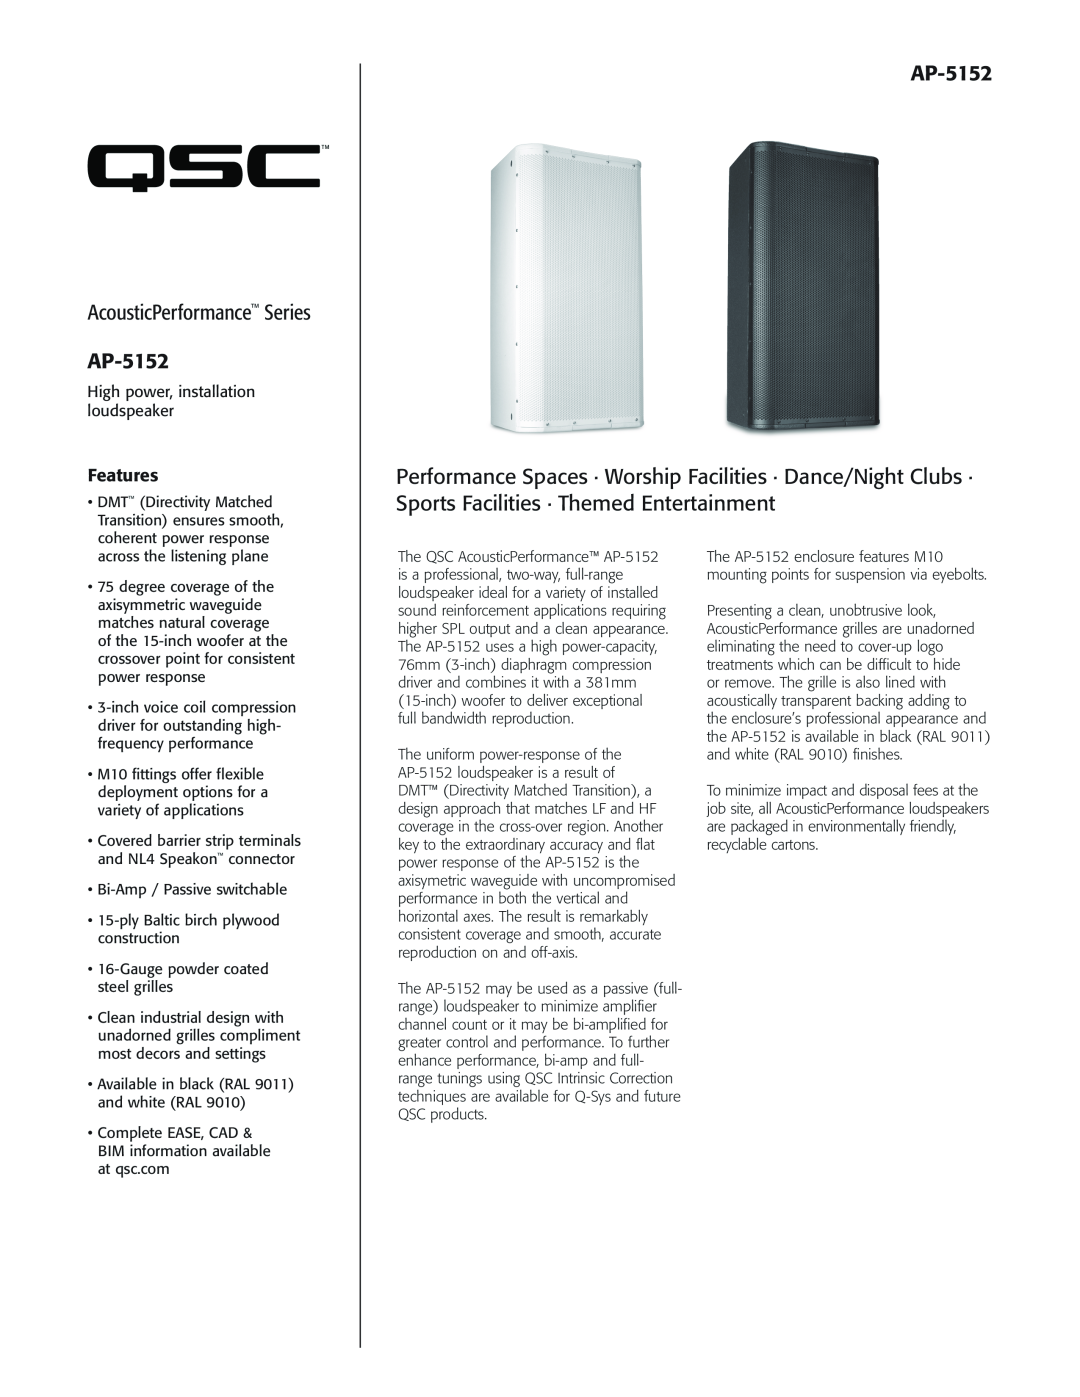 QSC Audio manual Features, AcousticPerformance Series AP-5152, High power, installation loudspeaker 